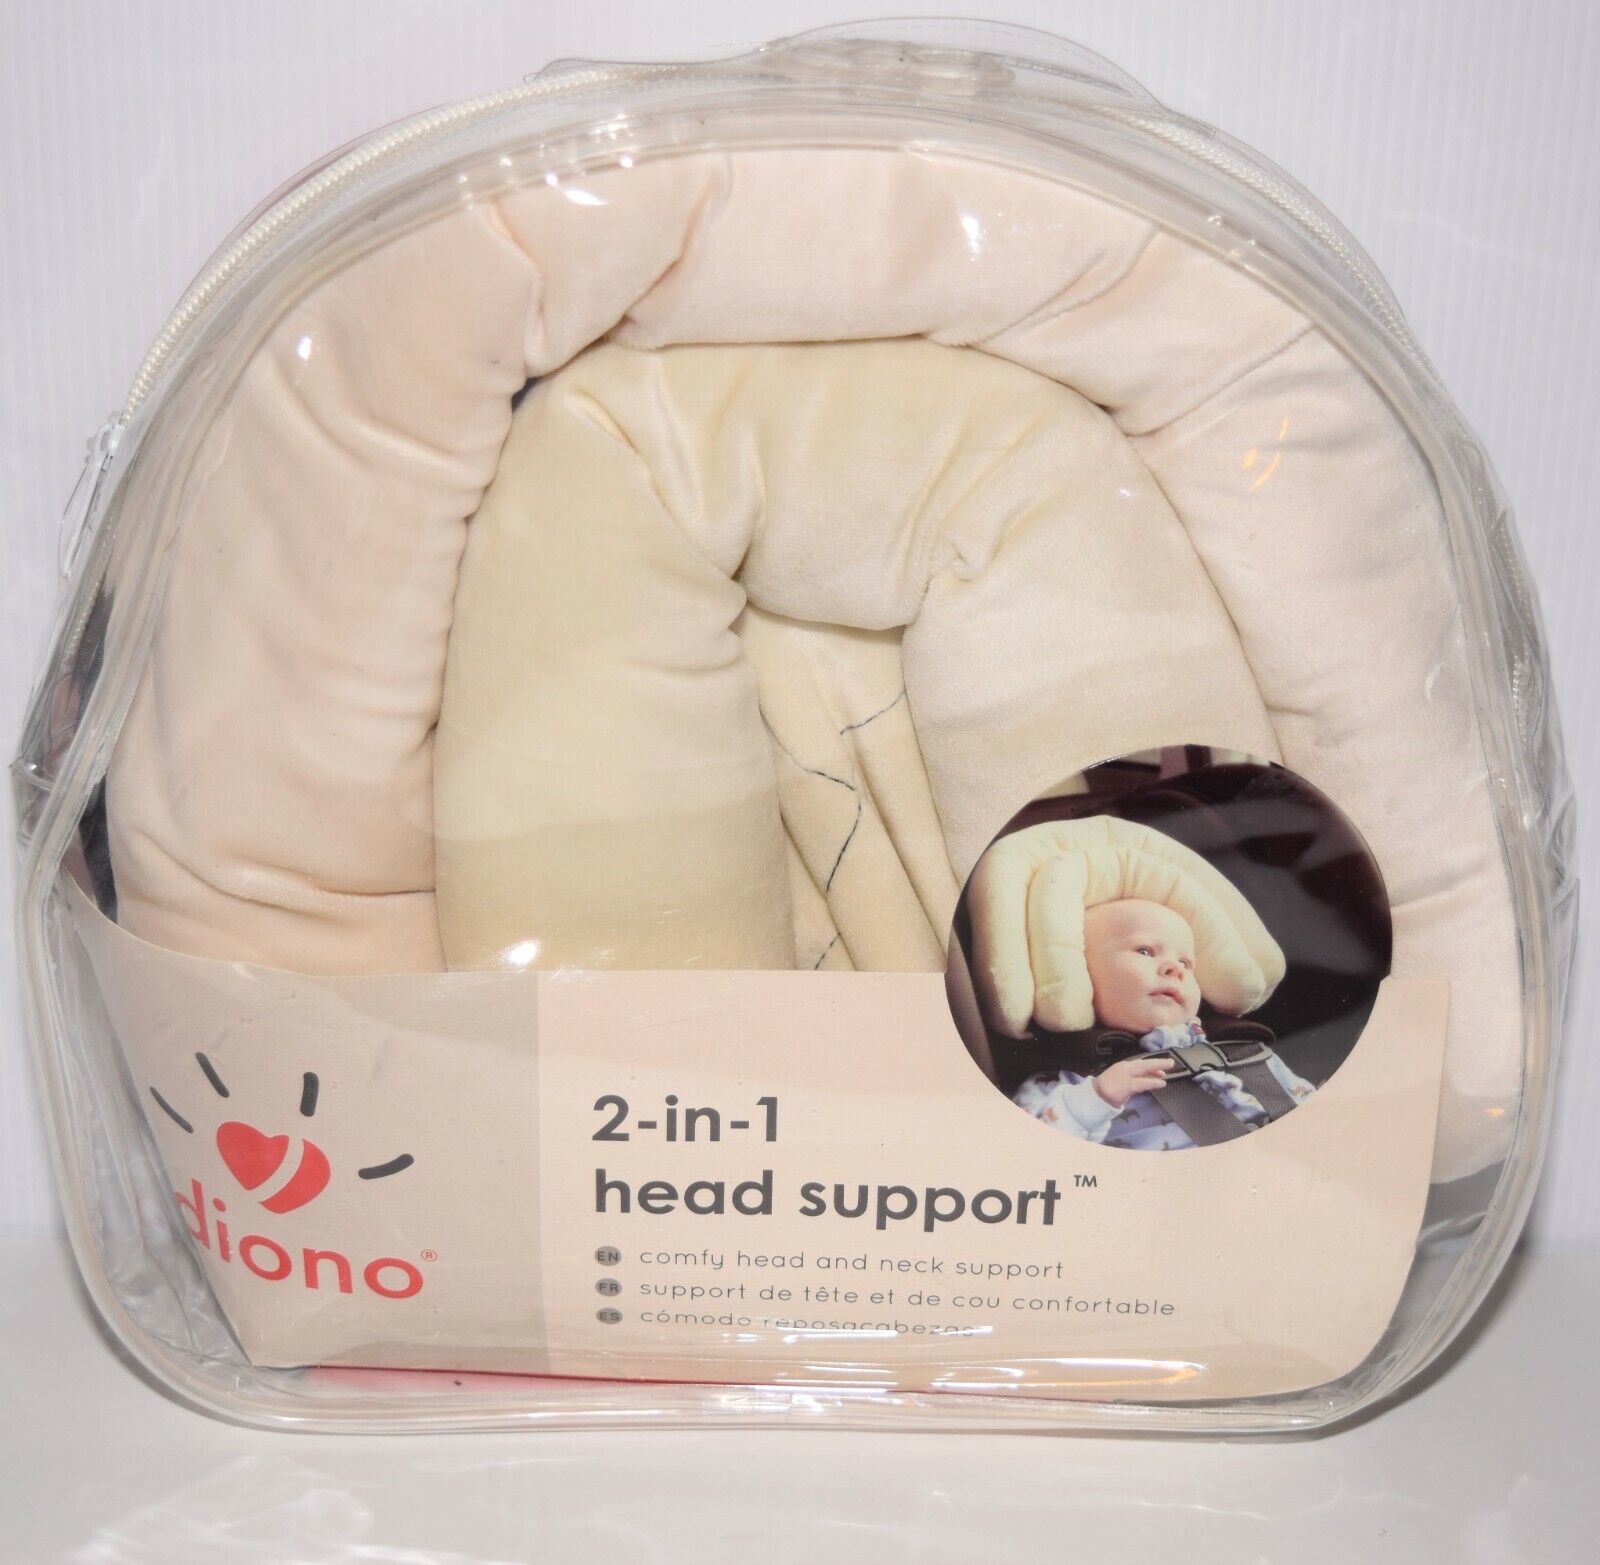 New Diono 2-In-1 Infant Head Support Seats Bou Car Clearance SALE Weekly update Limited time Strollers For